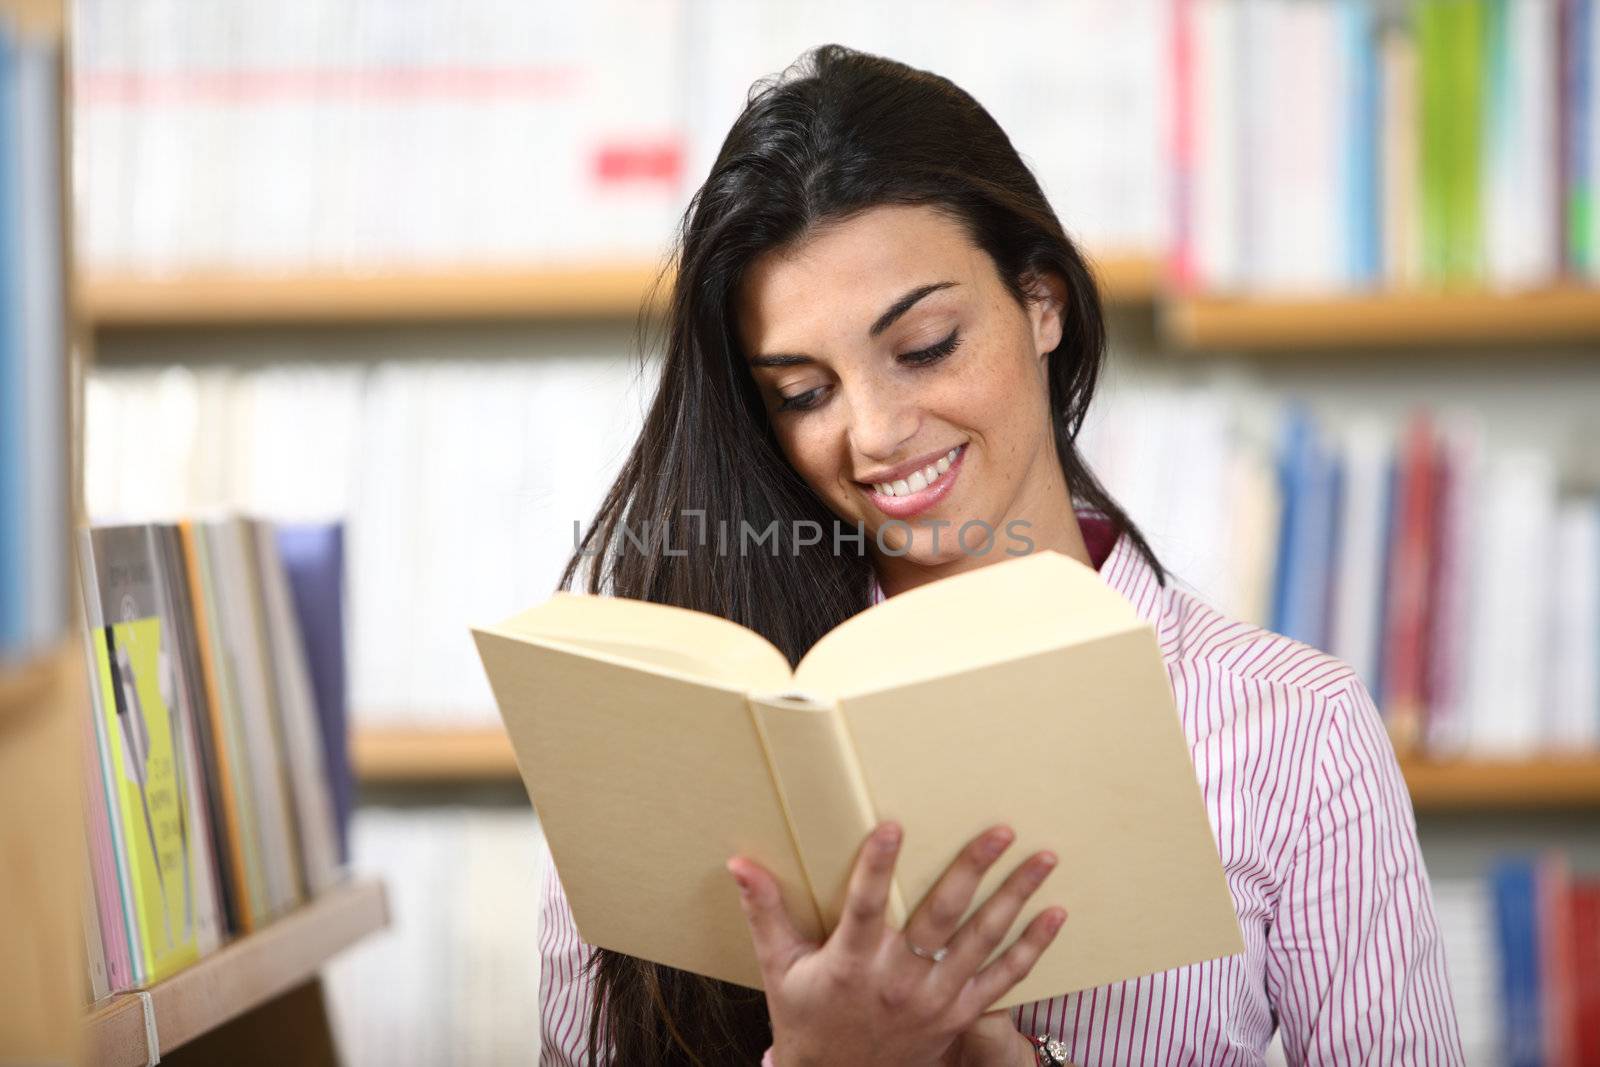 smiling female student with book in hands in a bookstore